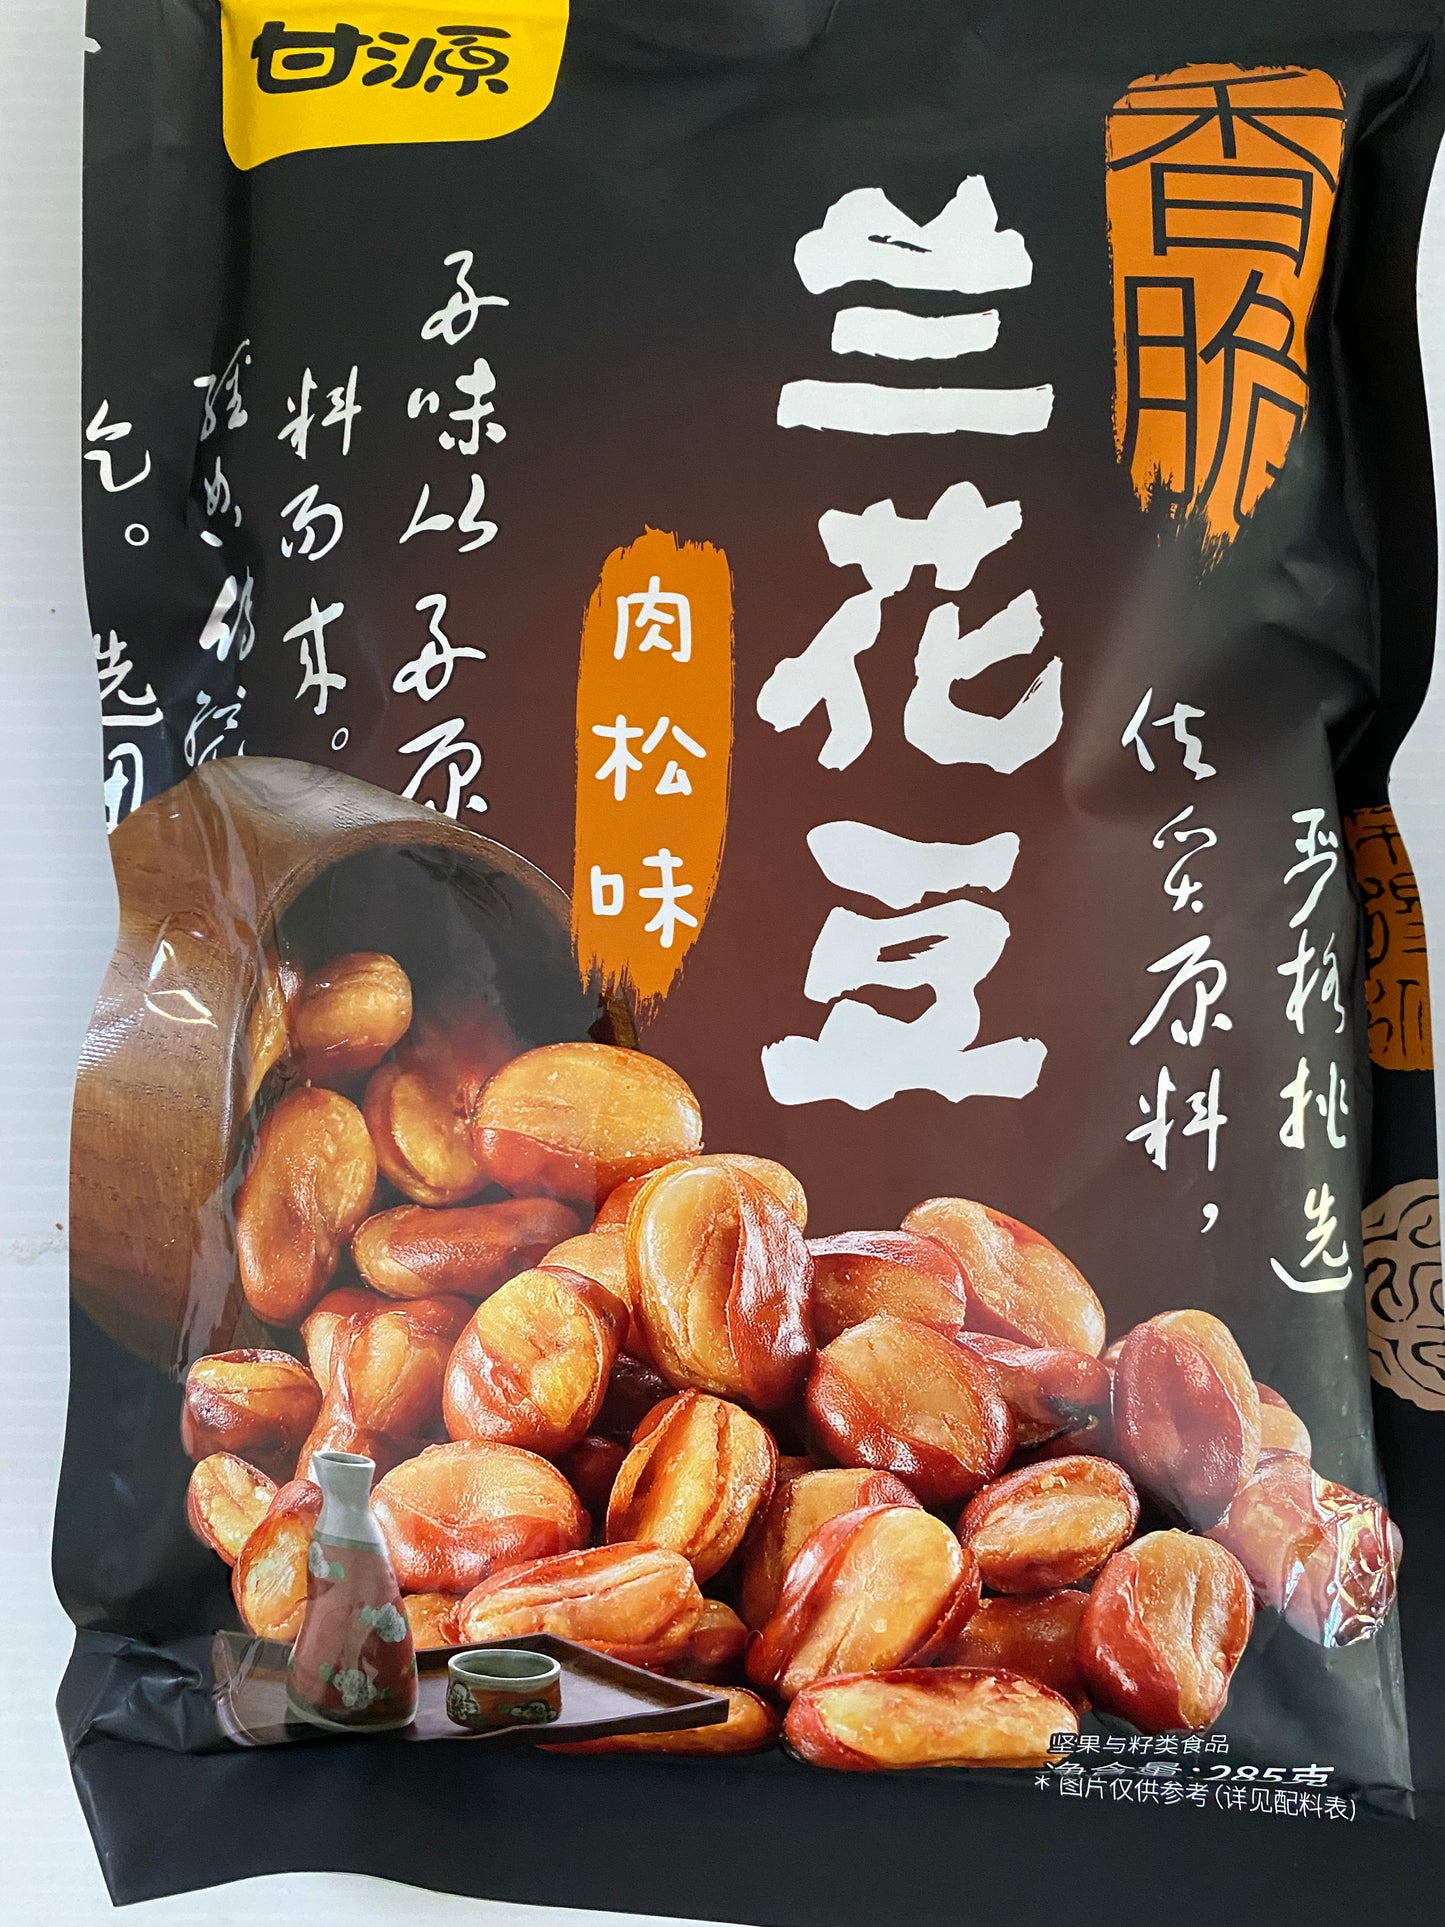 Fava beans, also known as orchid beans, with a sweet and savory taste, individually packaged in several bags, 285g each